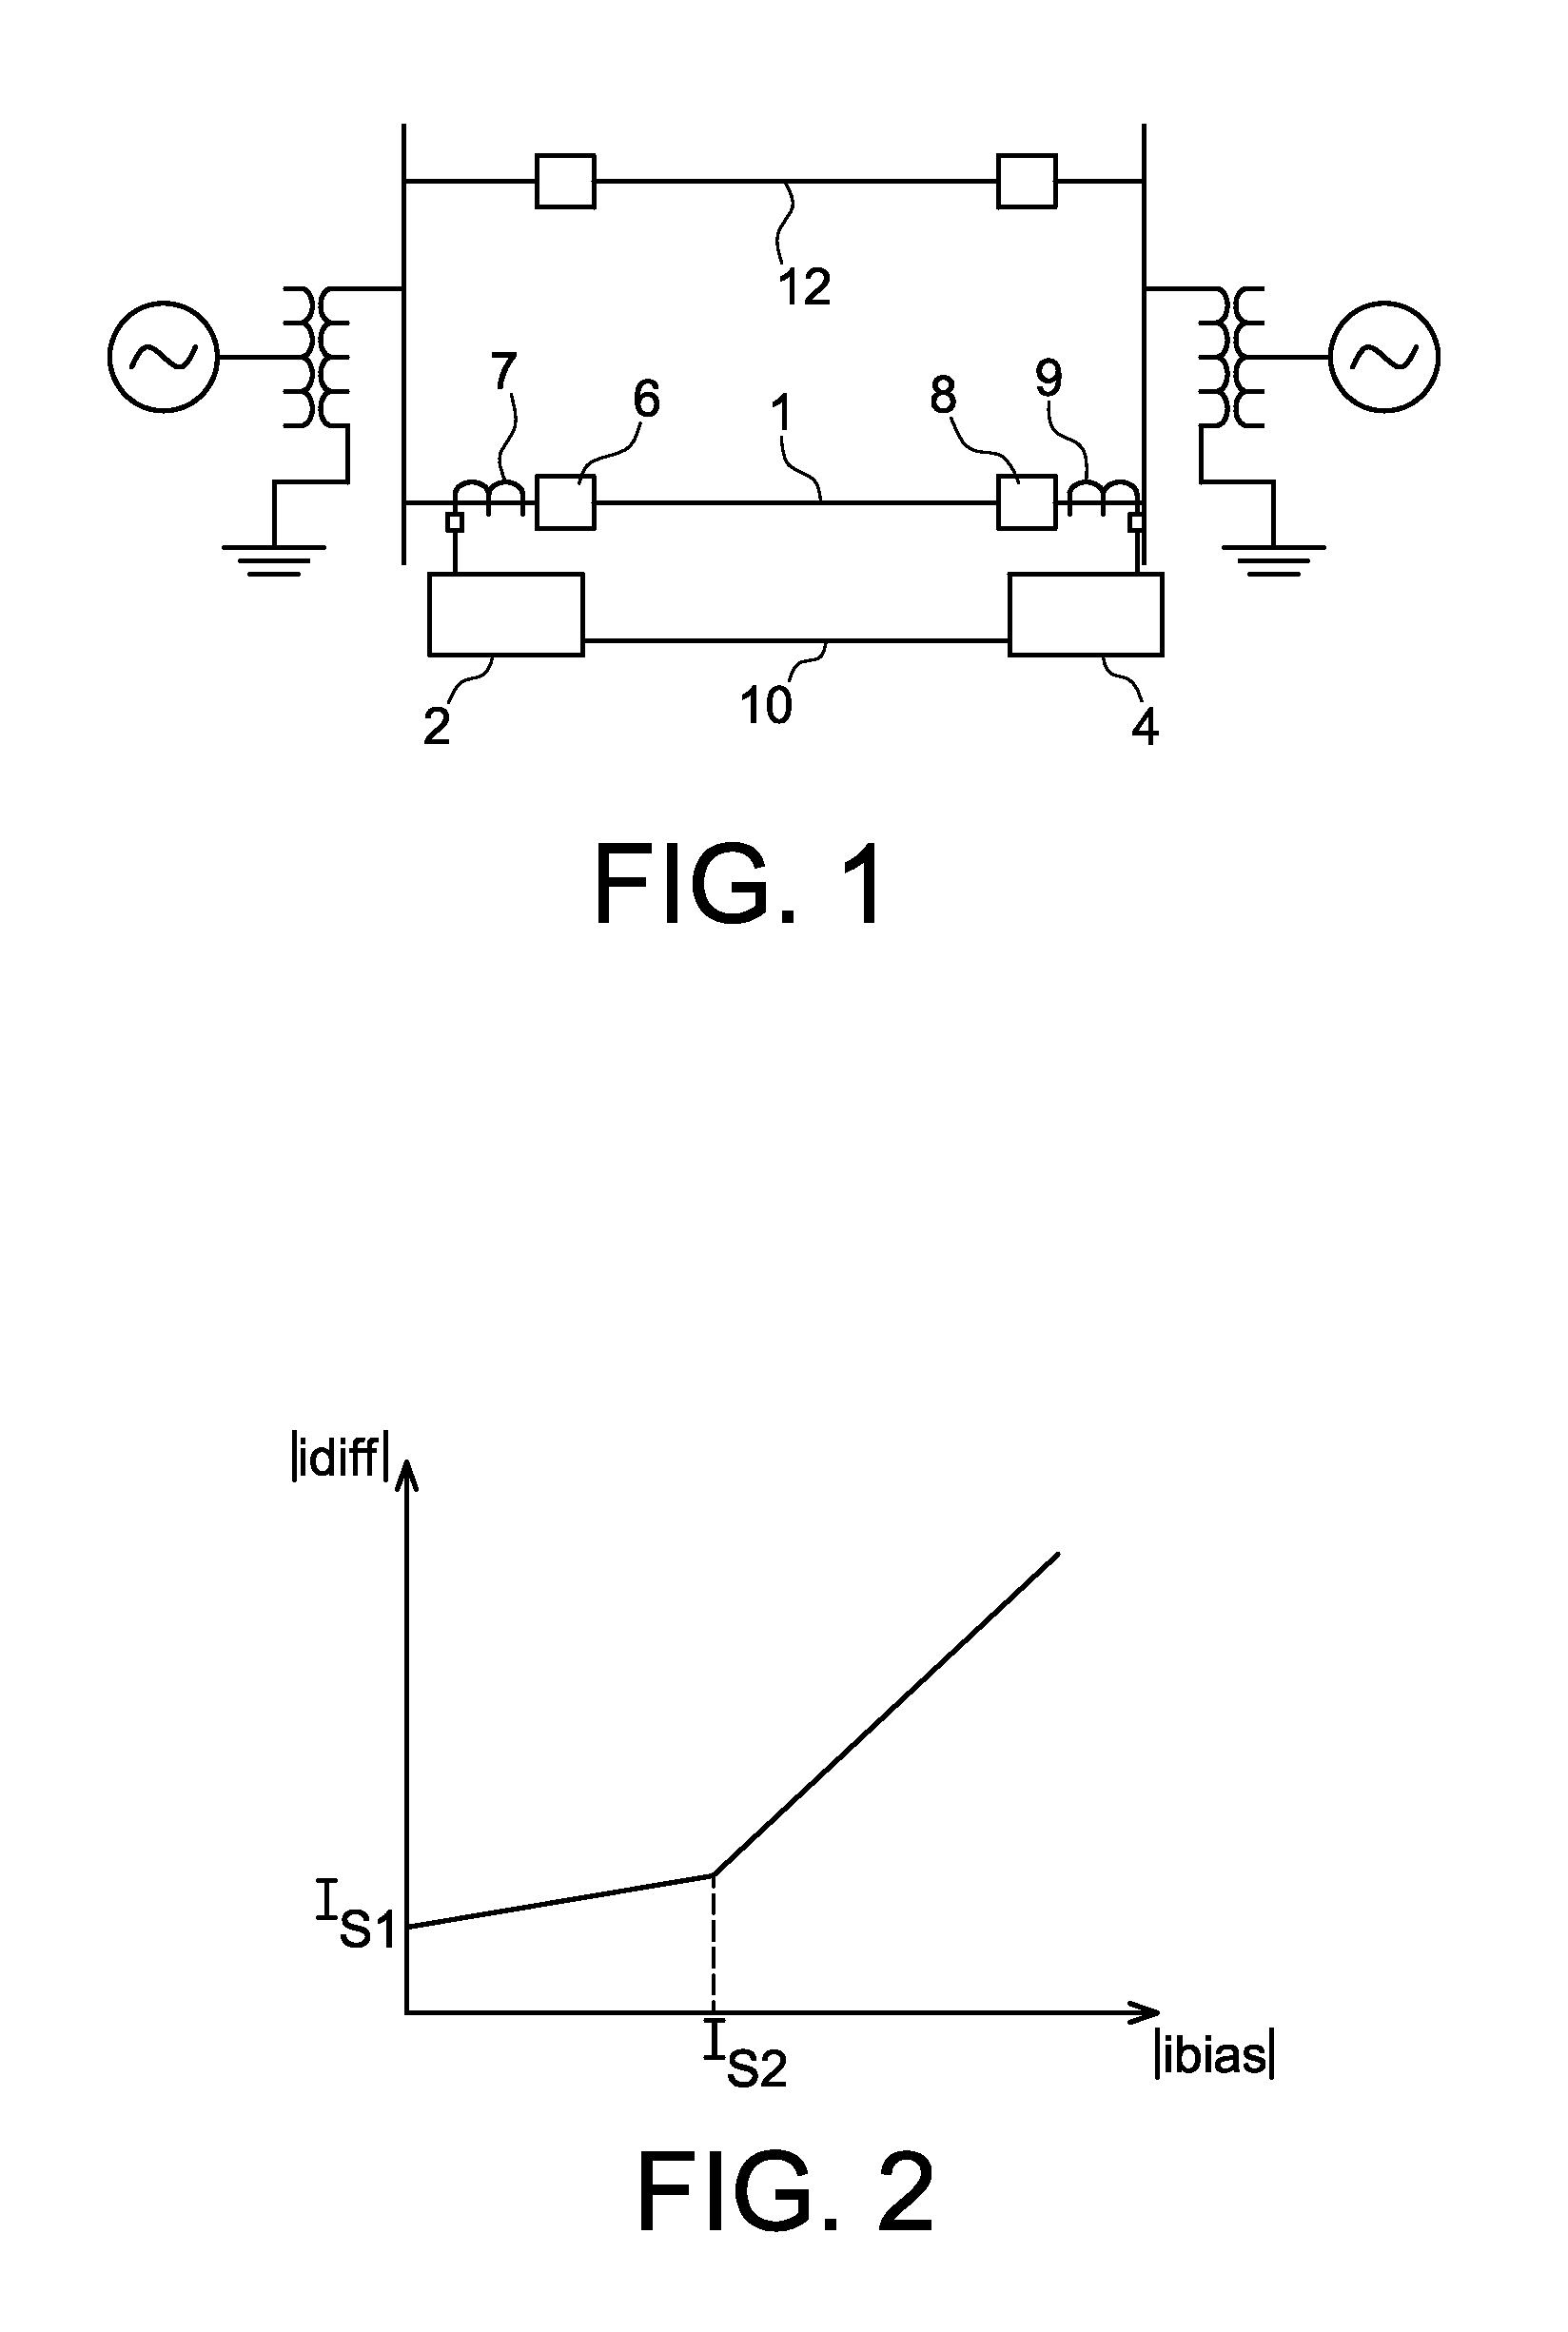 Method of high impedance groundfault detection for differential protection of overhead transmission lines